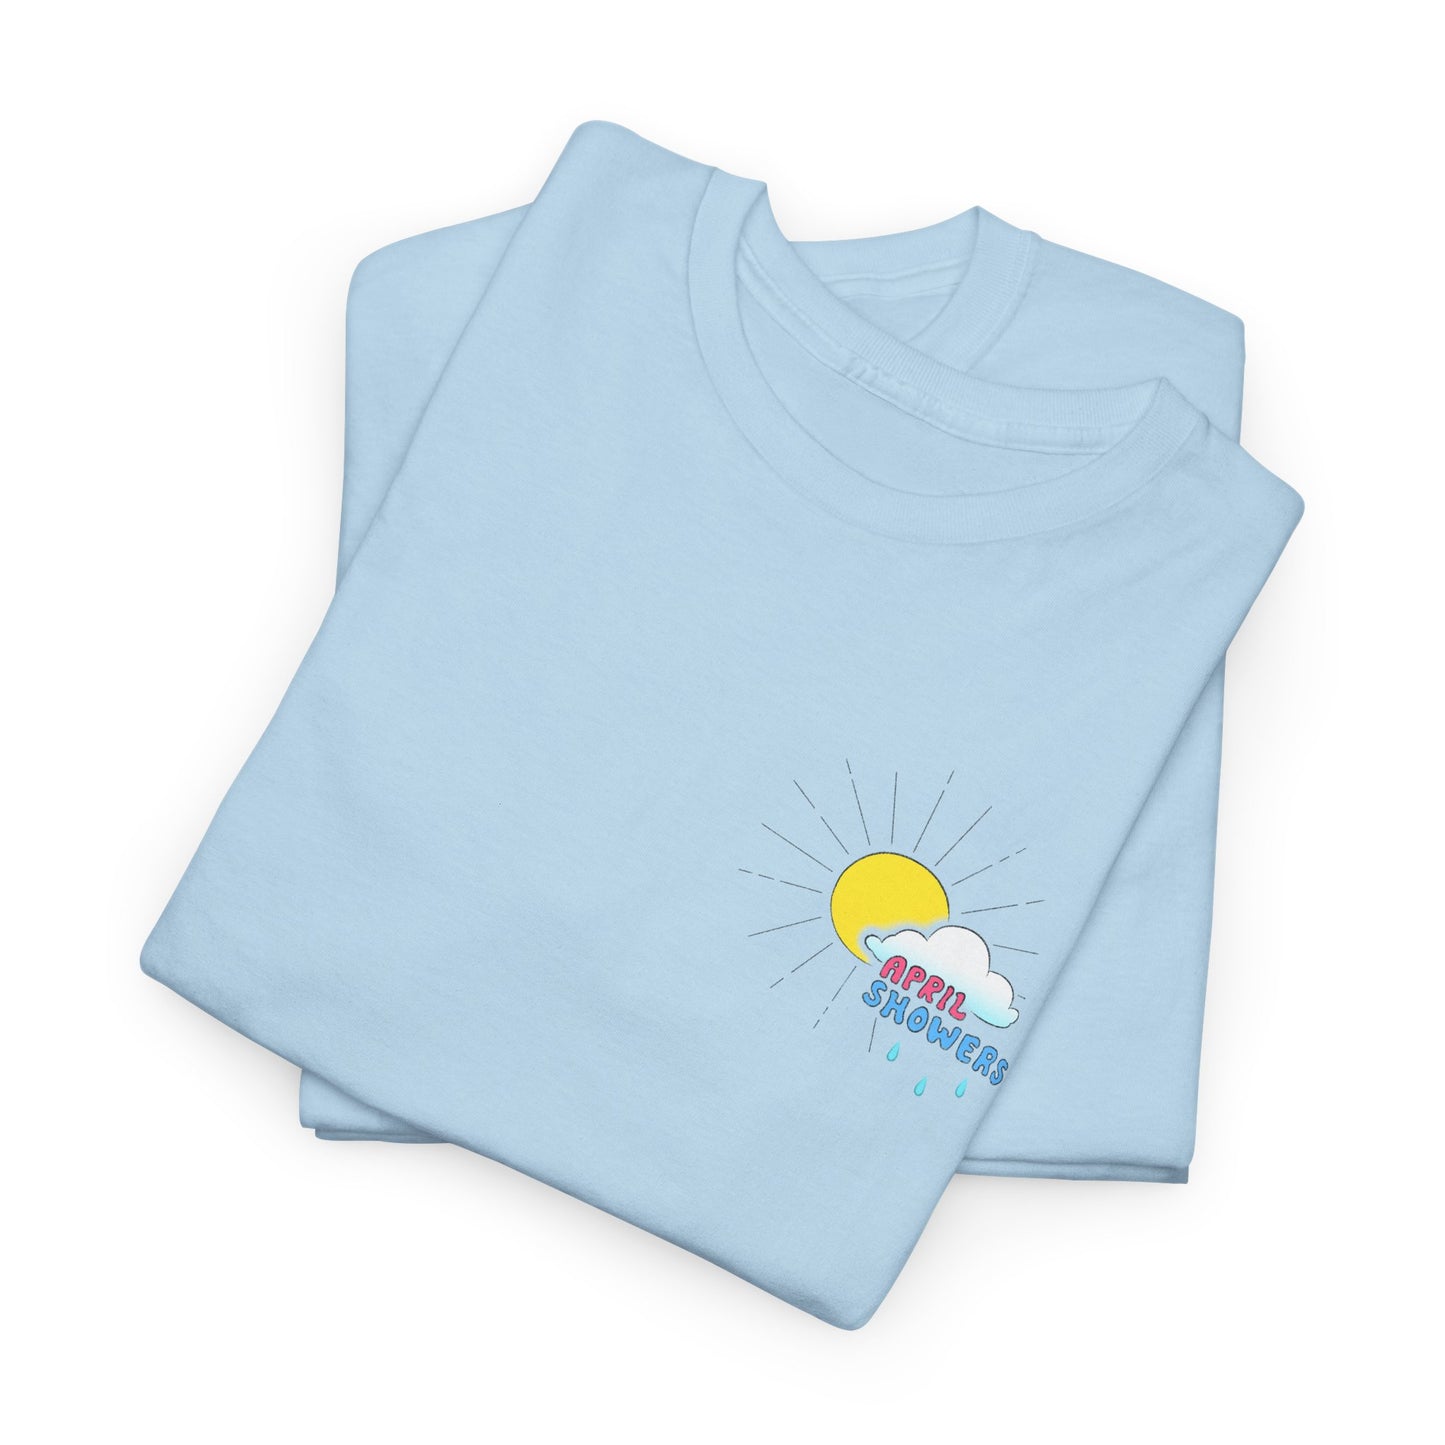 April Showers Tee